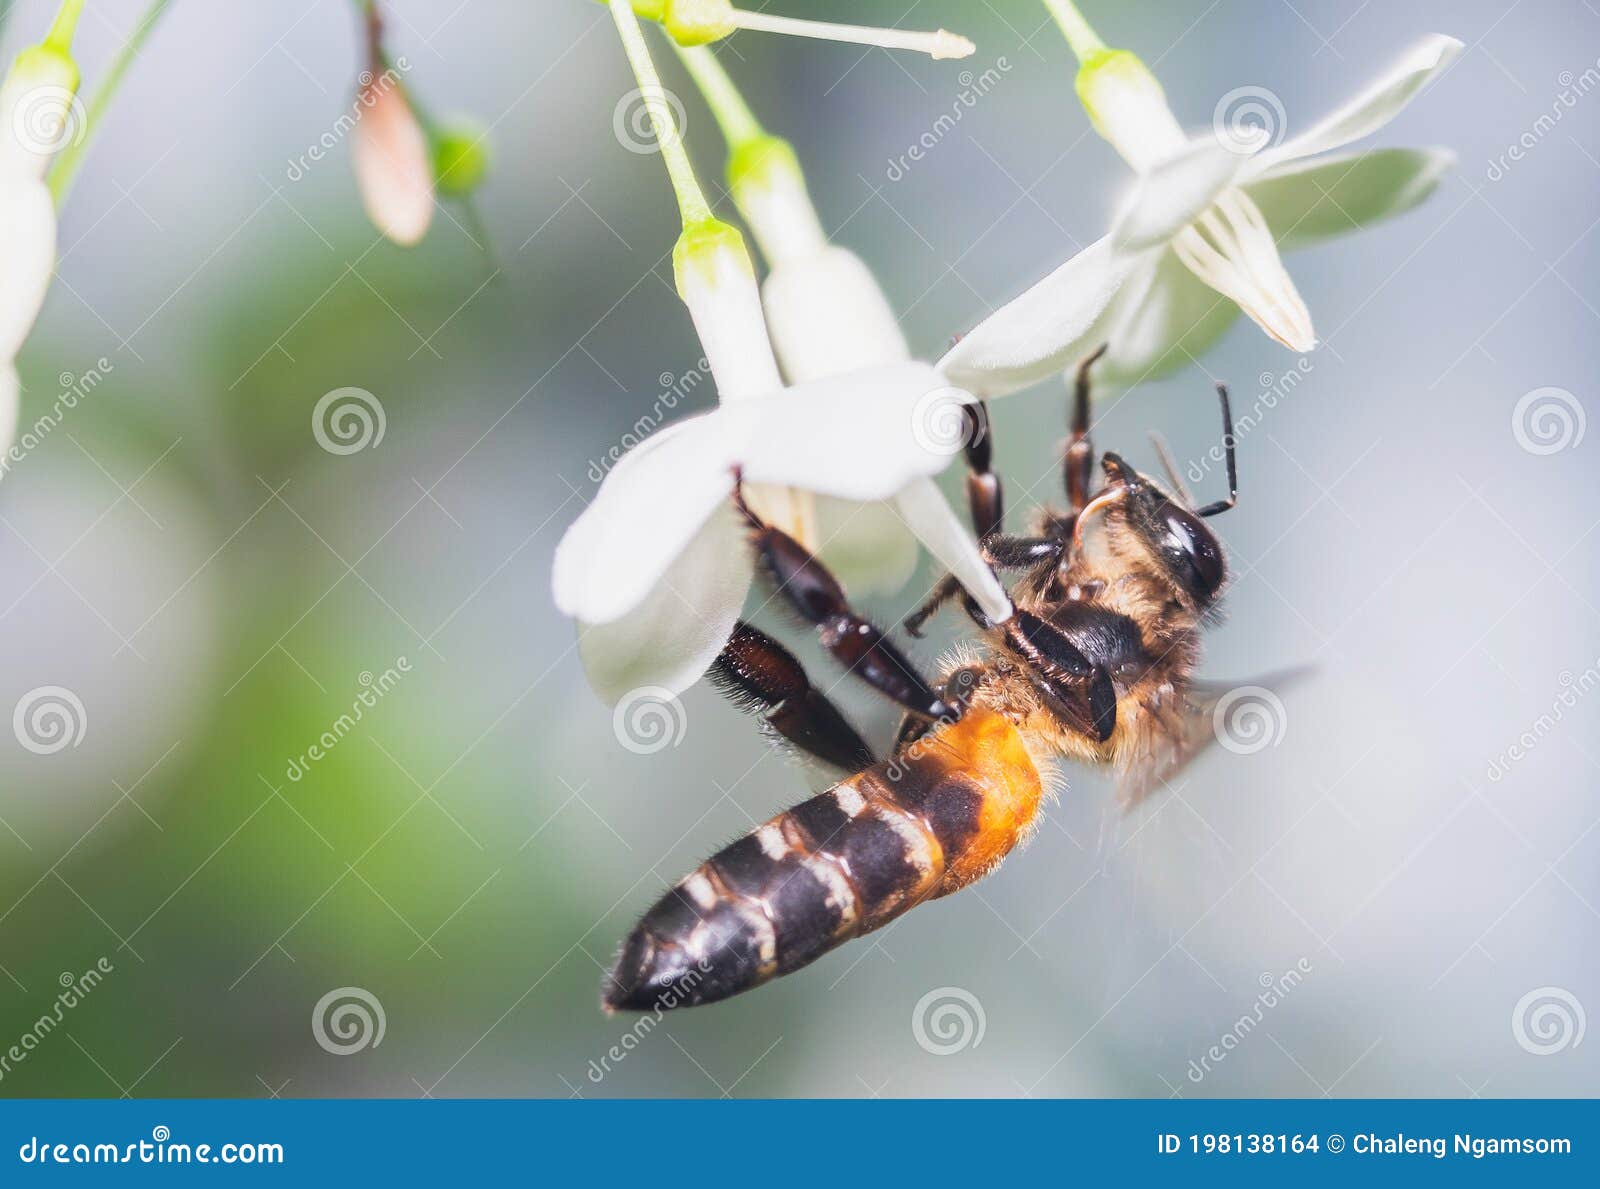 wasps sucking nectar from flowers